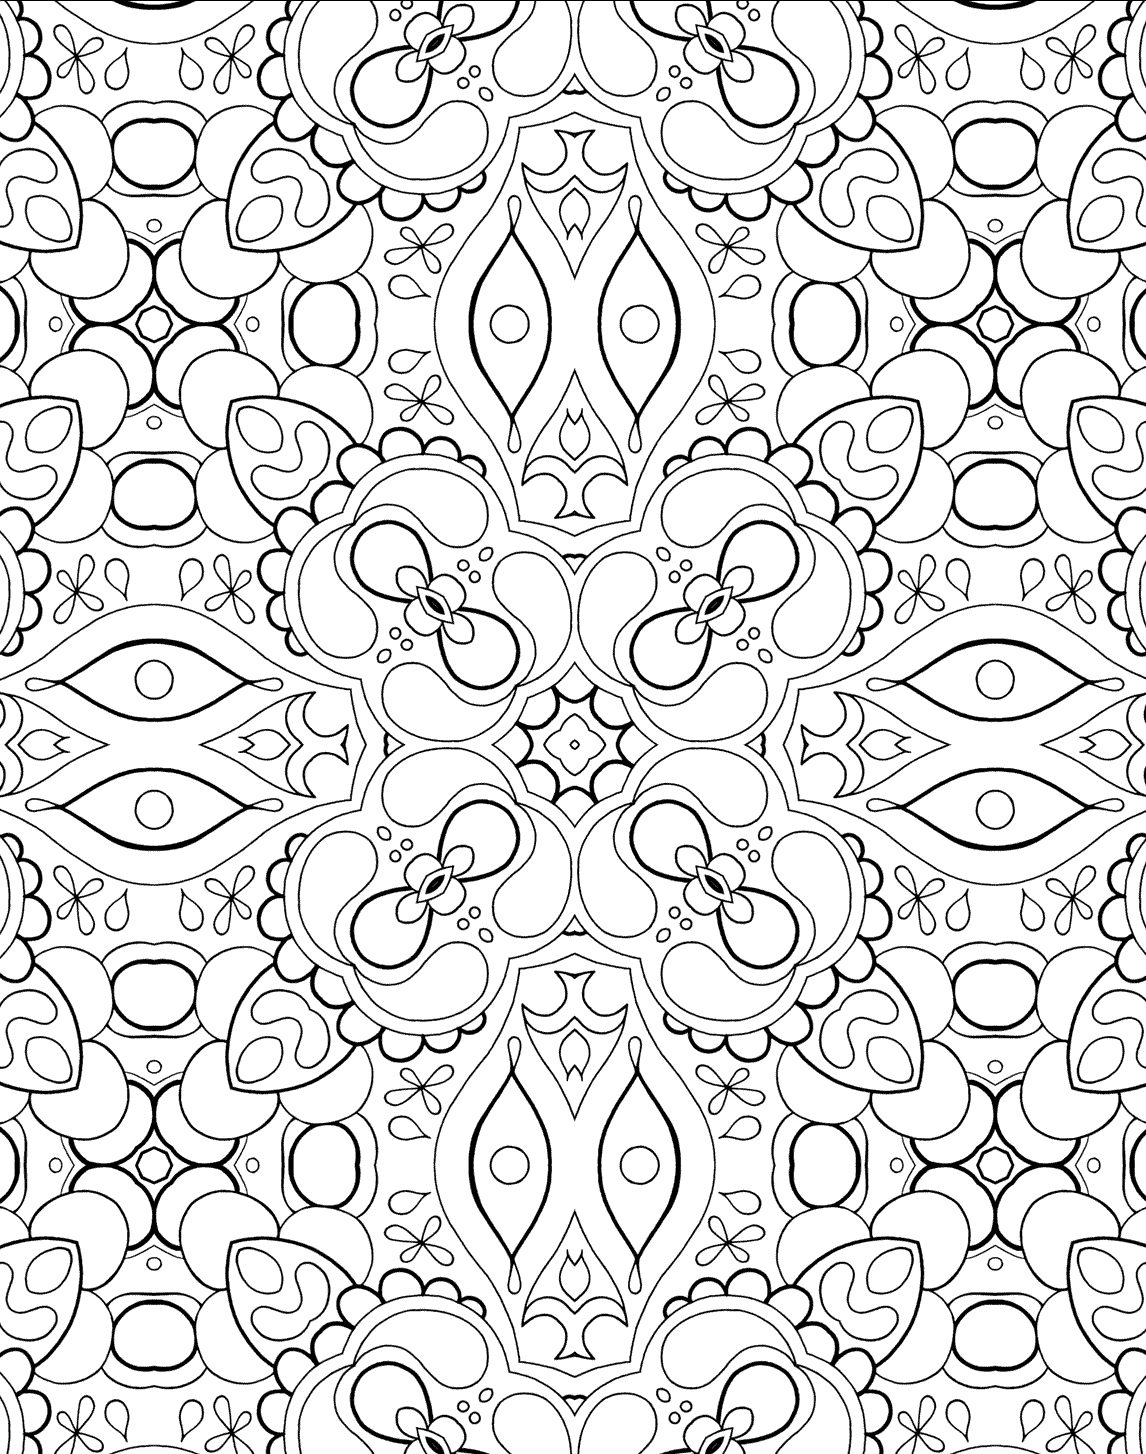 Free Printable Mindfulness Coloring Pages